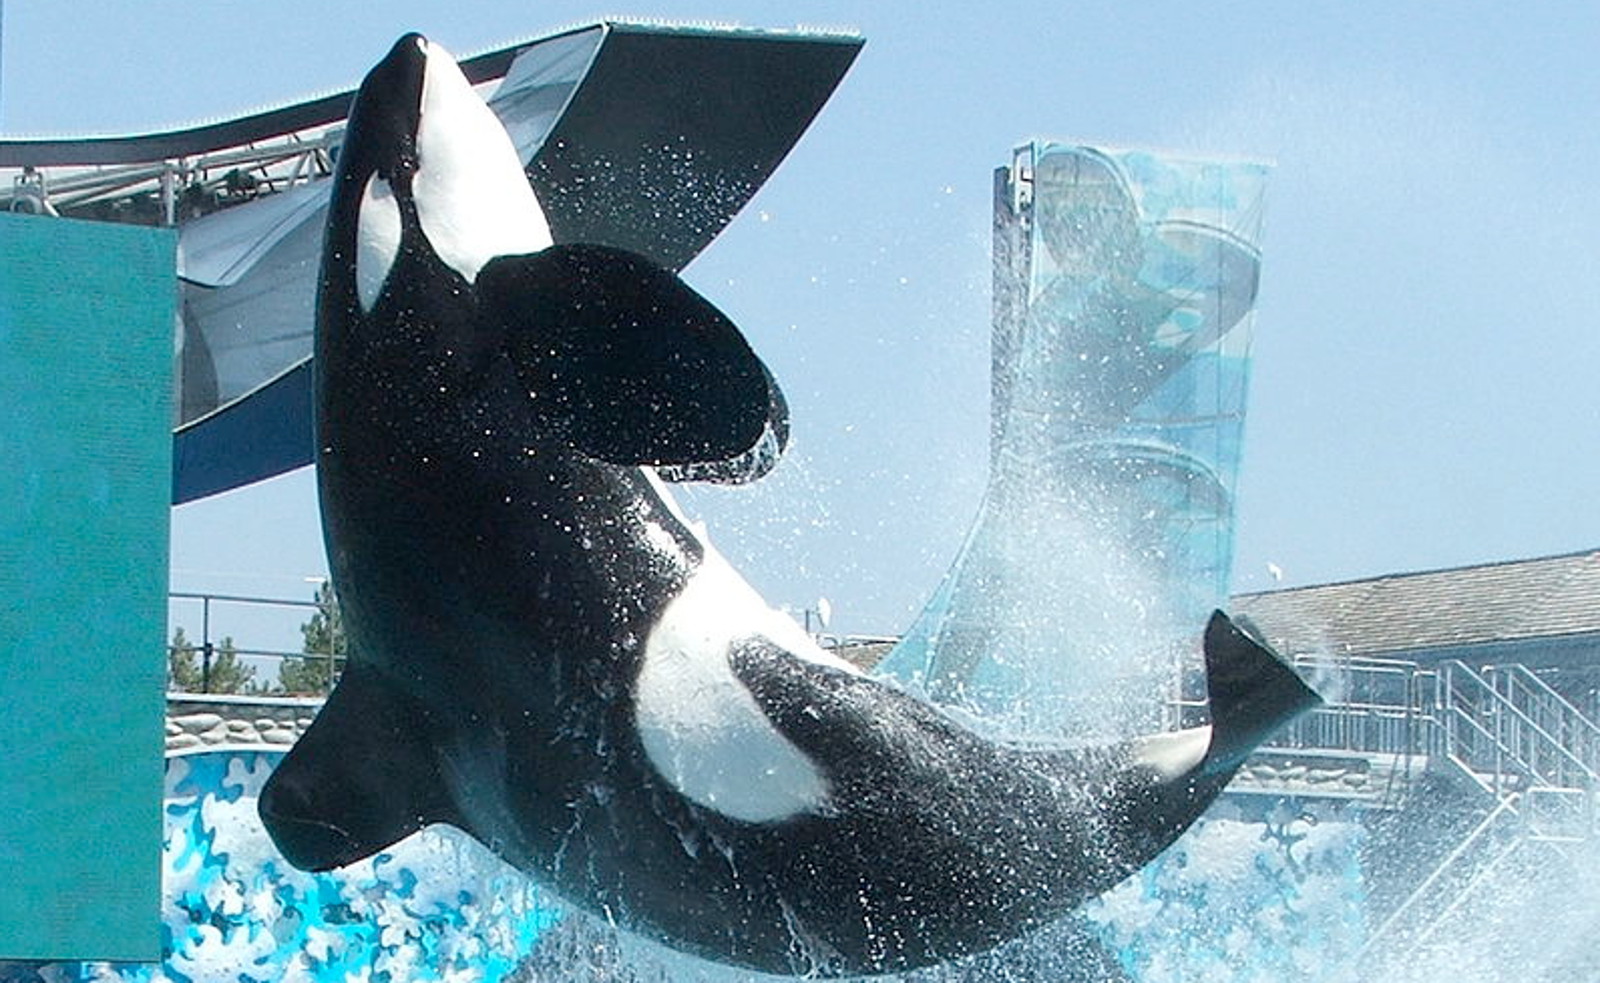 Where Are the World's Wild Caught Orca Whales Being Held Prisoner?